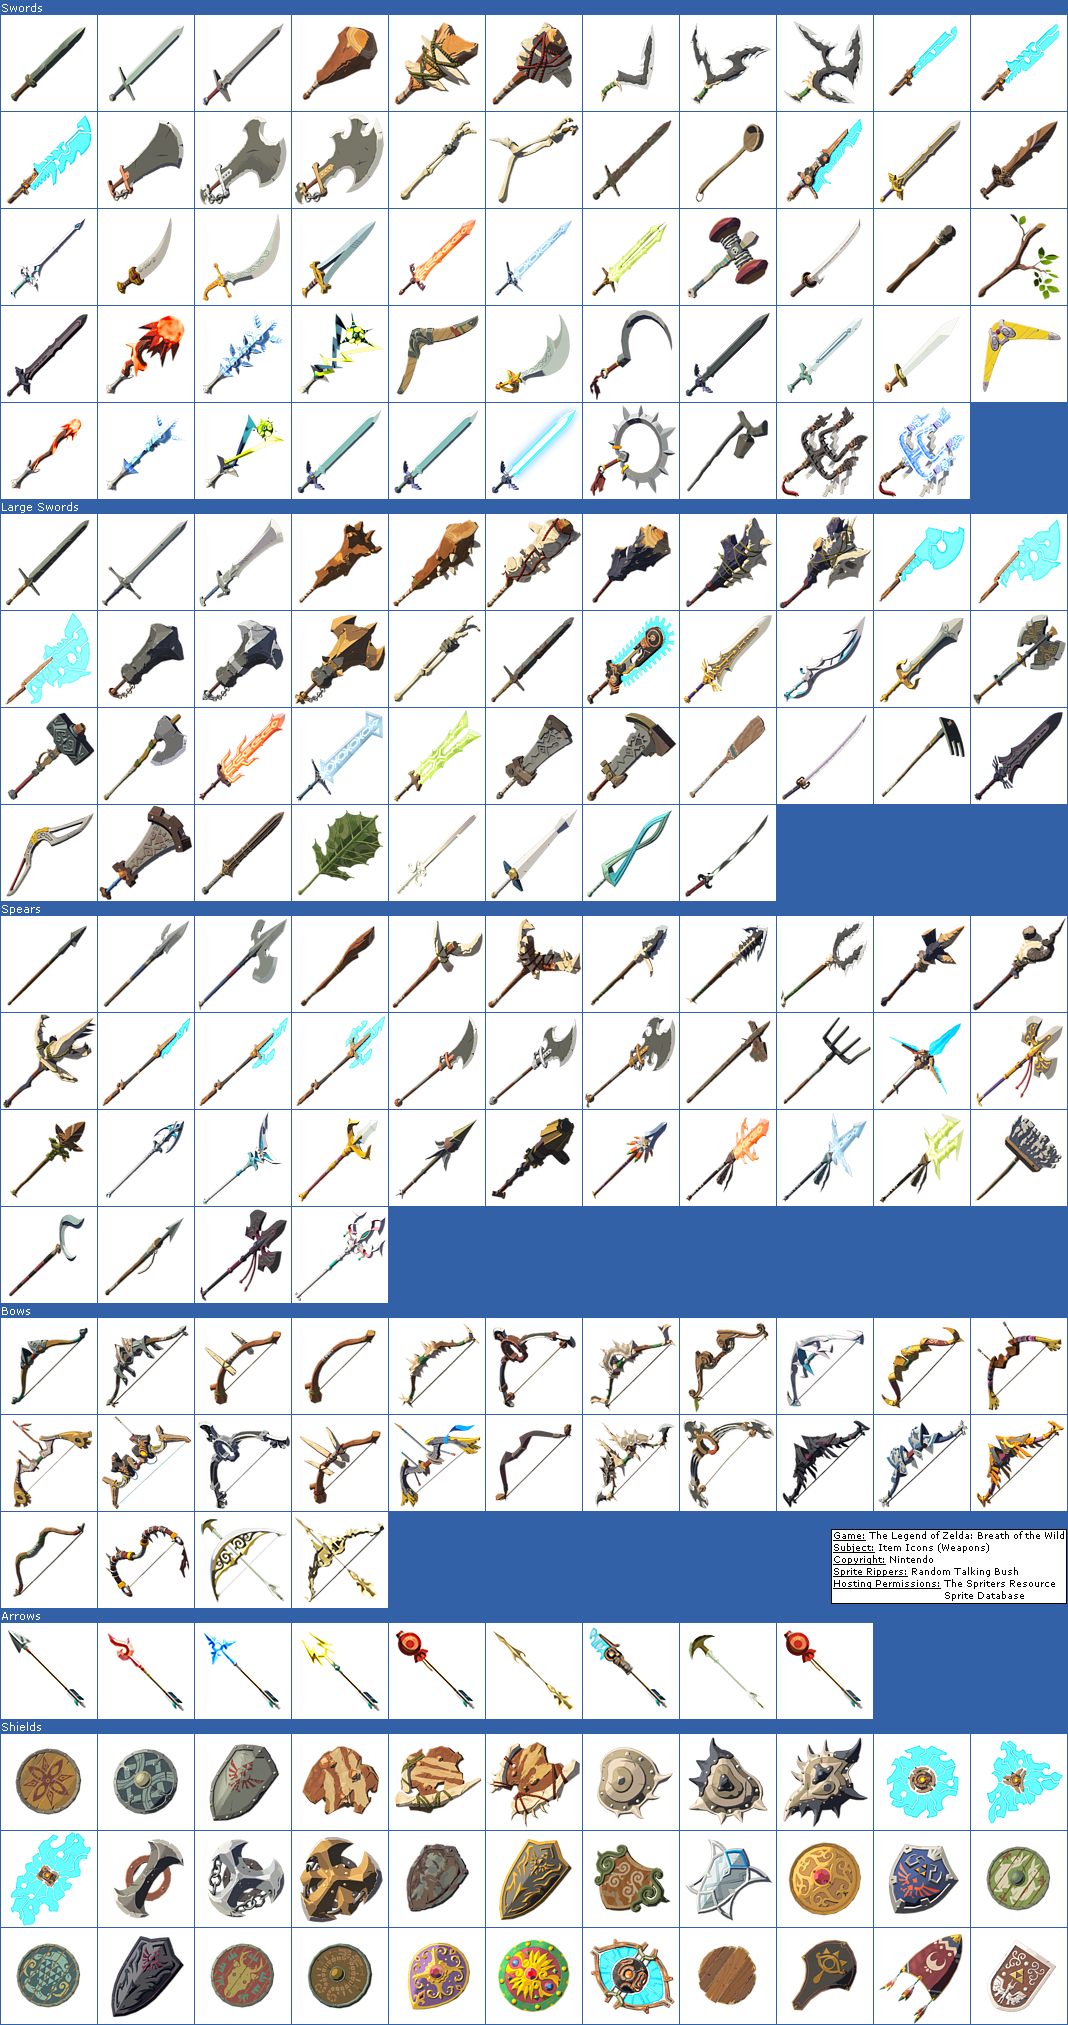 Item Icons (Weapons)